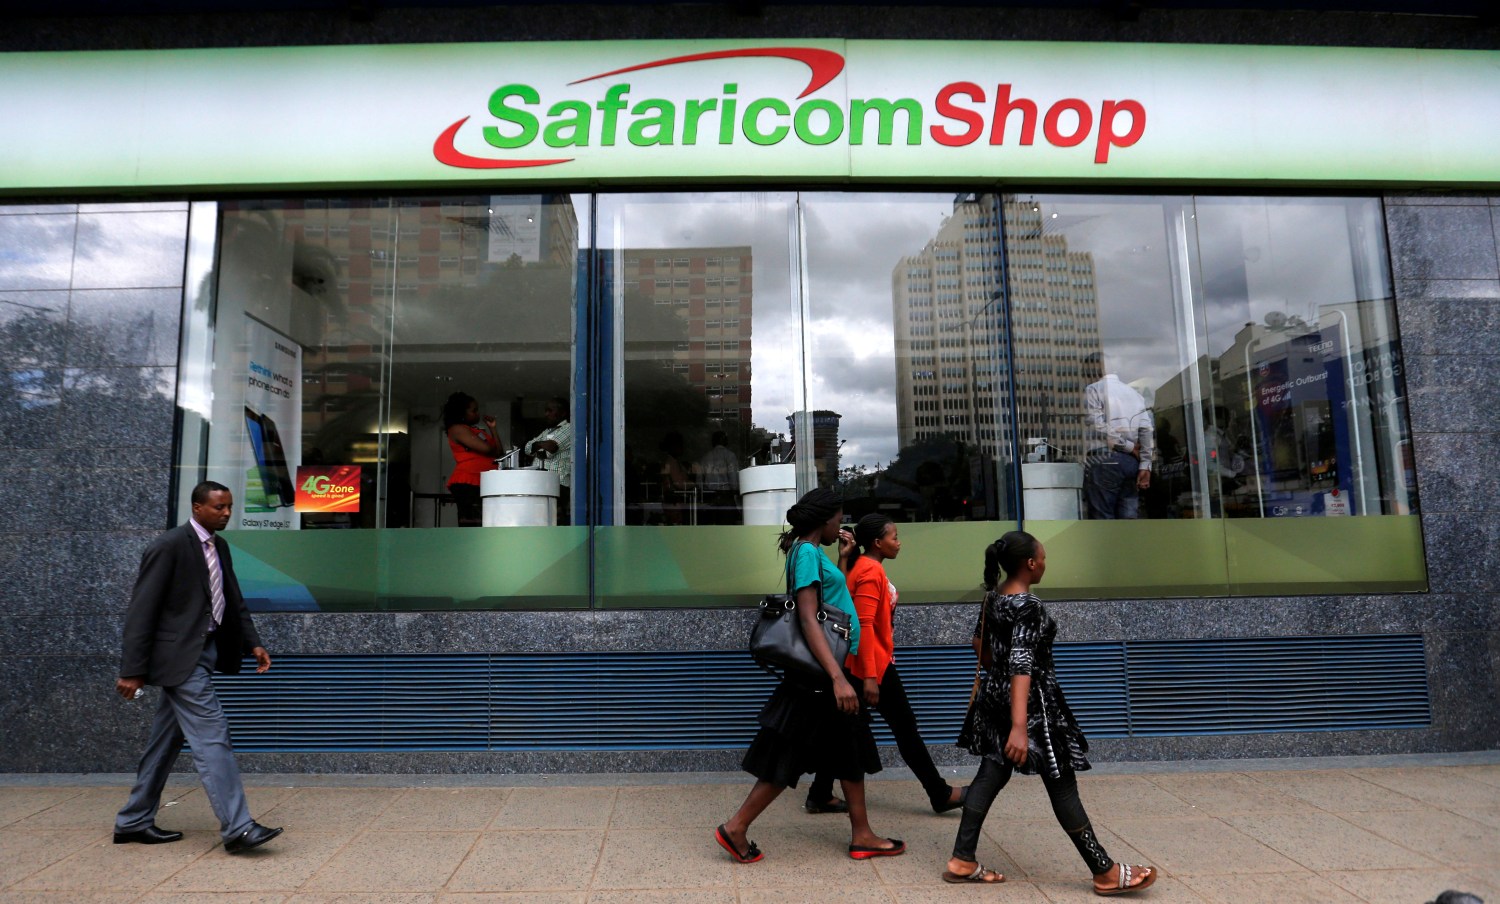 FILE PHOTO: A mobile phone care centre operated by Safaricom in the central business district of Kenya's capital Nairobi, May 11, 2016. REUTERS/Thomas Mukoya/File Photo